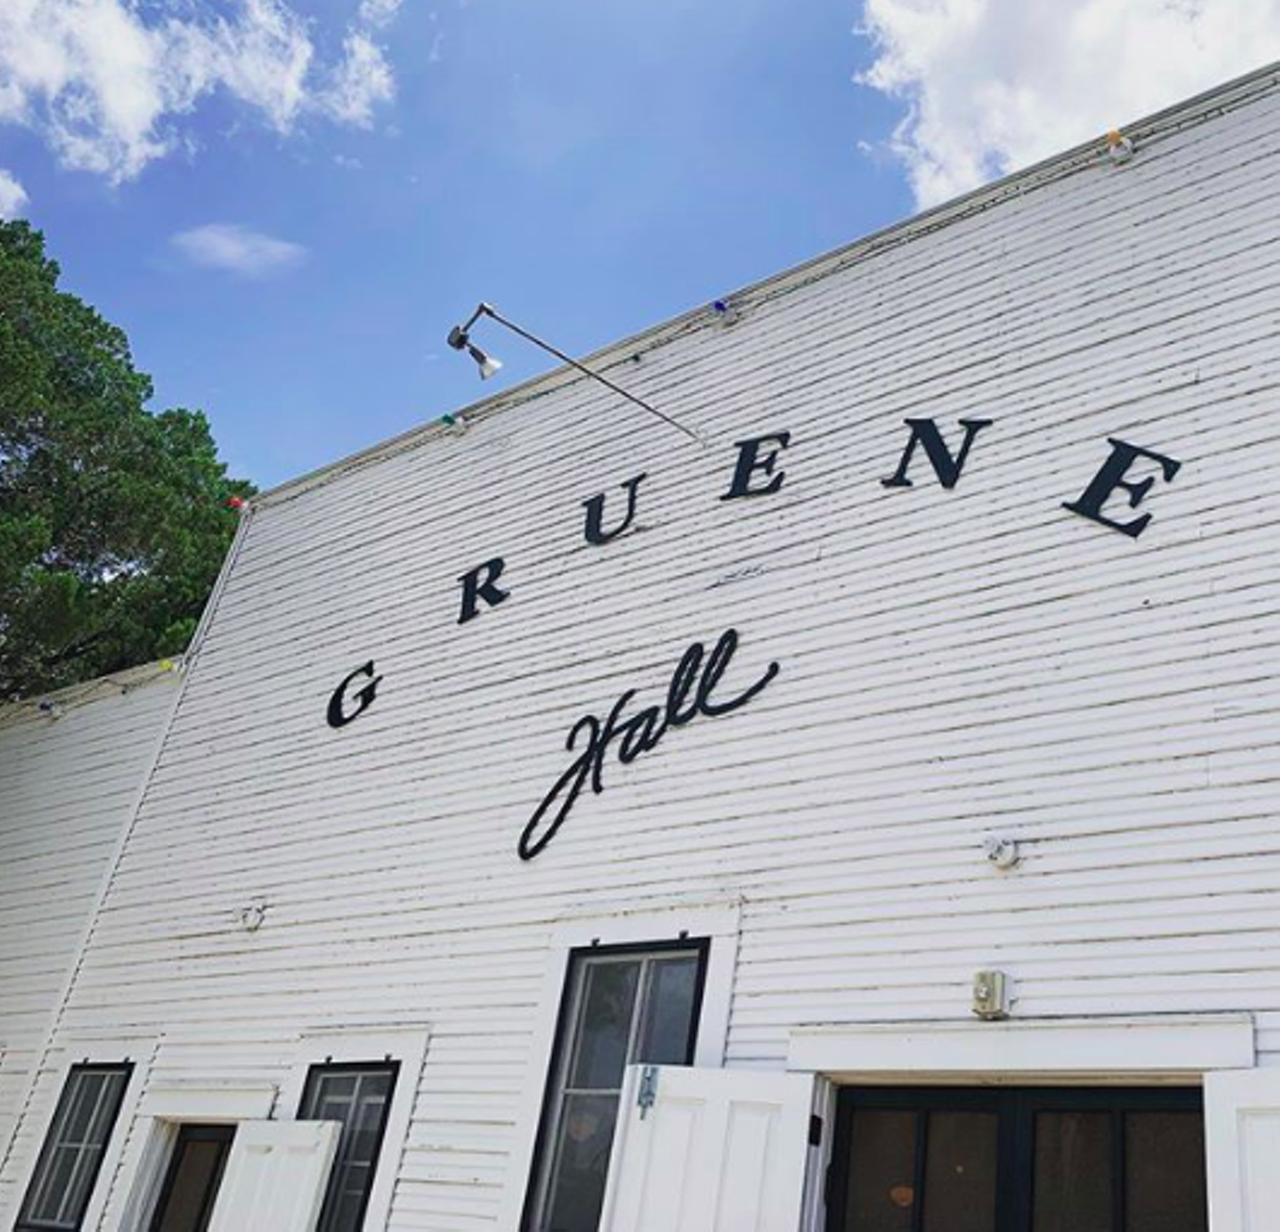 Gruene Hall
1281 Gruene Road, New Braunfels, (830) 606-1281, gruenehall.com
Familiar to most country music fans, Gruene Hall is packed with plenty of history, given that it was built in 1878. As the oldest dance hall in Texas, it has seen a notable lineup of acts since its opening, from big, touring acts to local musicians trying to get their break. In addition to country, the hall also host Americana and blues acts on the regular.
Photo via Instagram / djr_trvlee